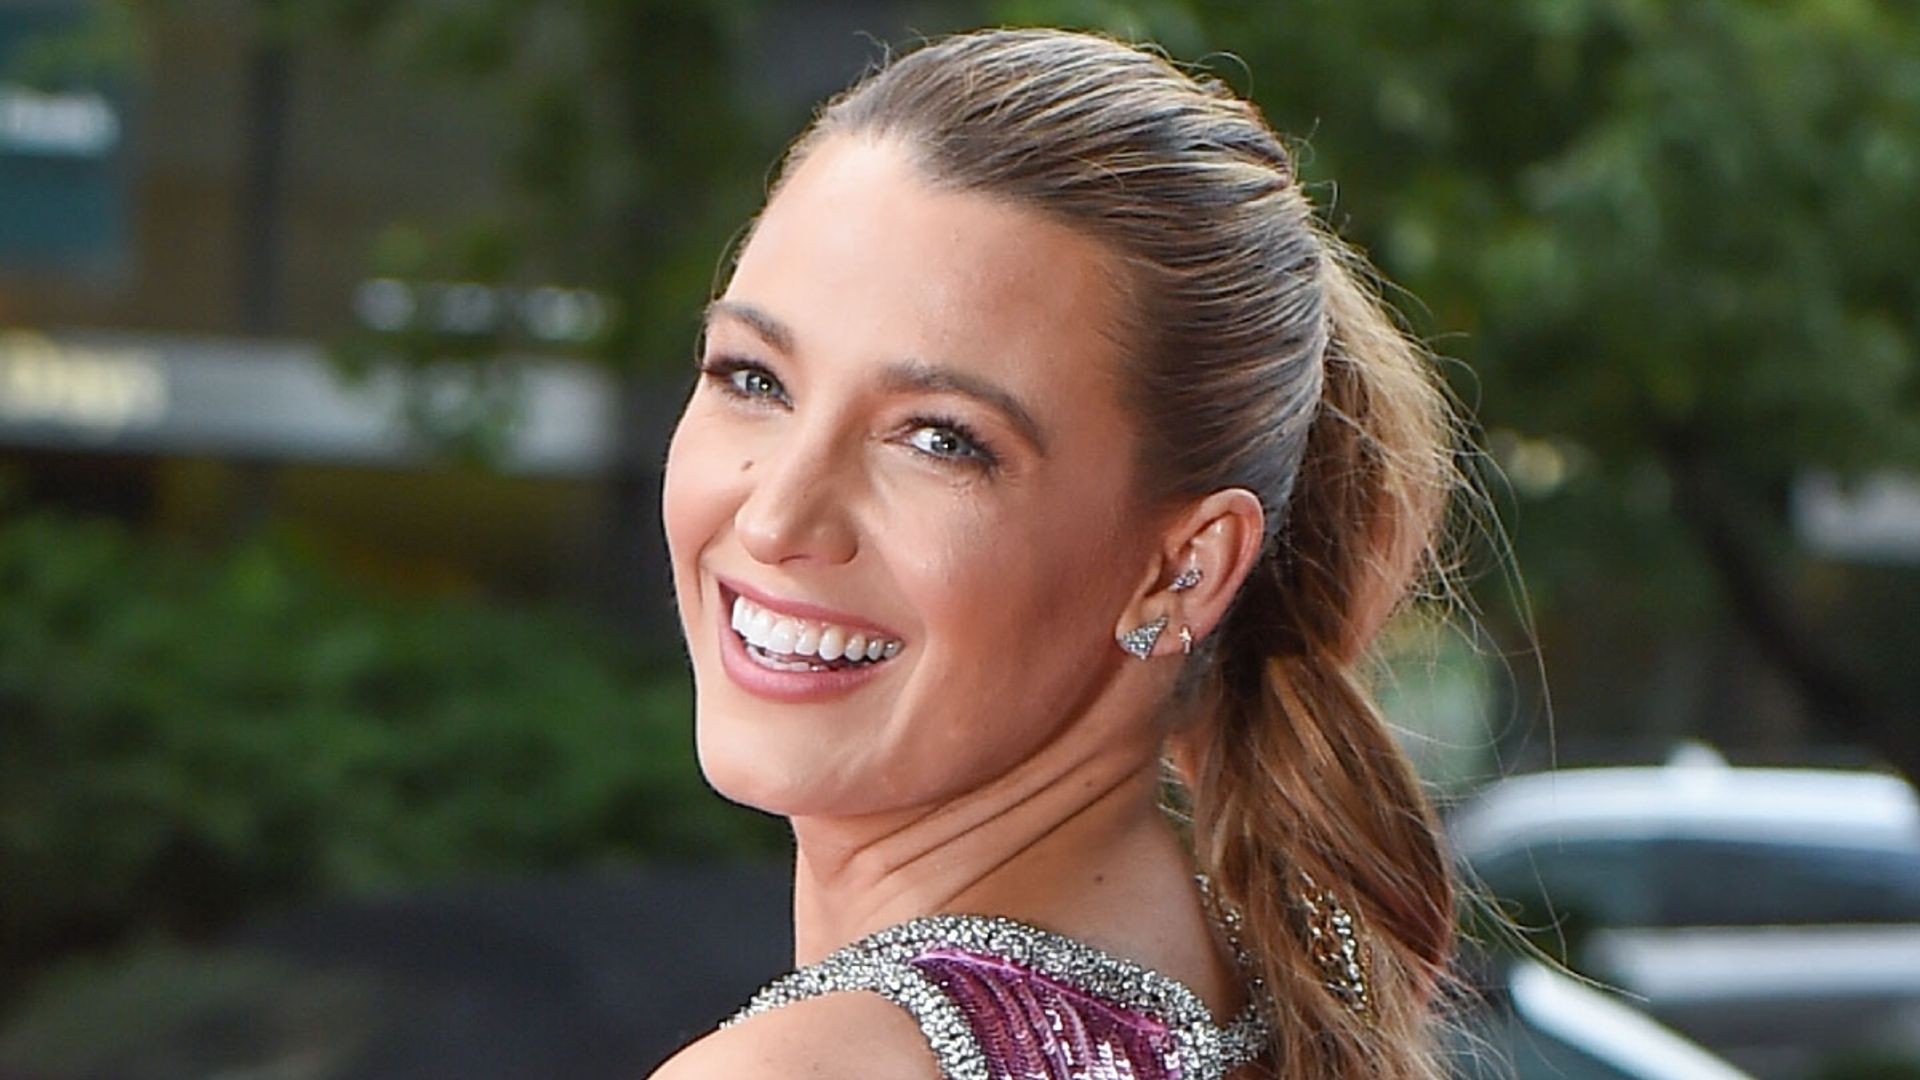 Blake Lively stuns in a red mini dress for a heartfelt occasion